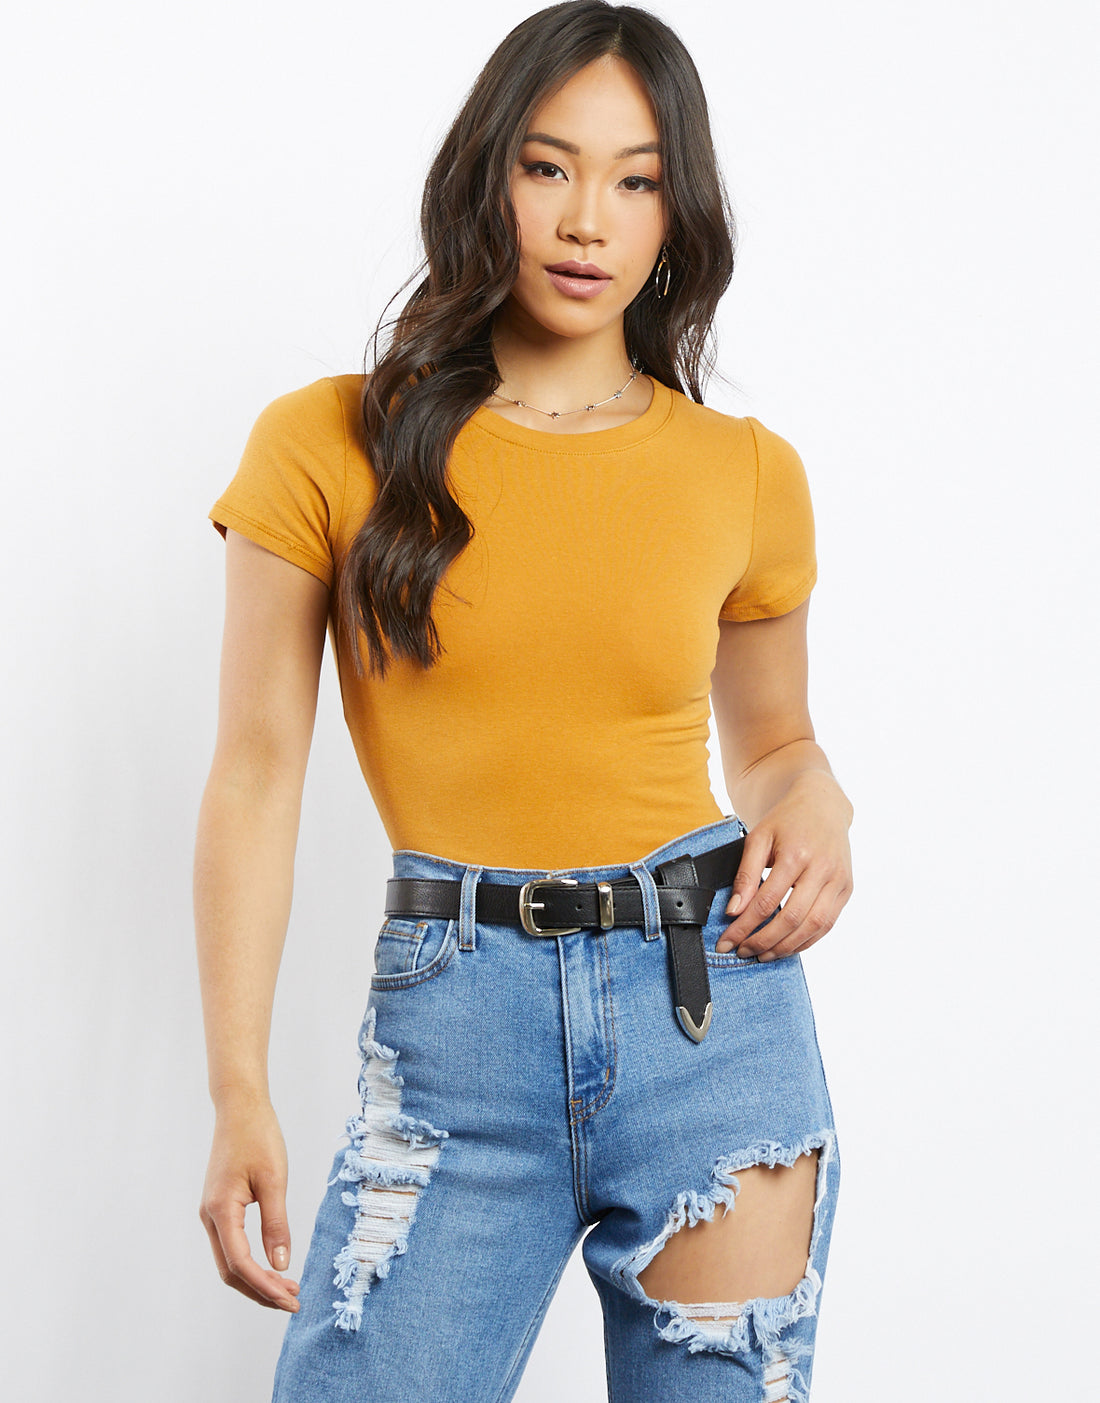 No Pressure Crop Tee Tops Mustard Small -2020AVE